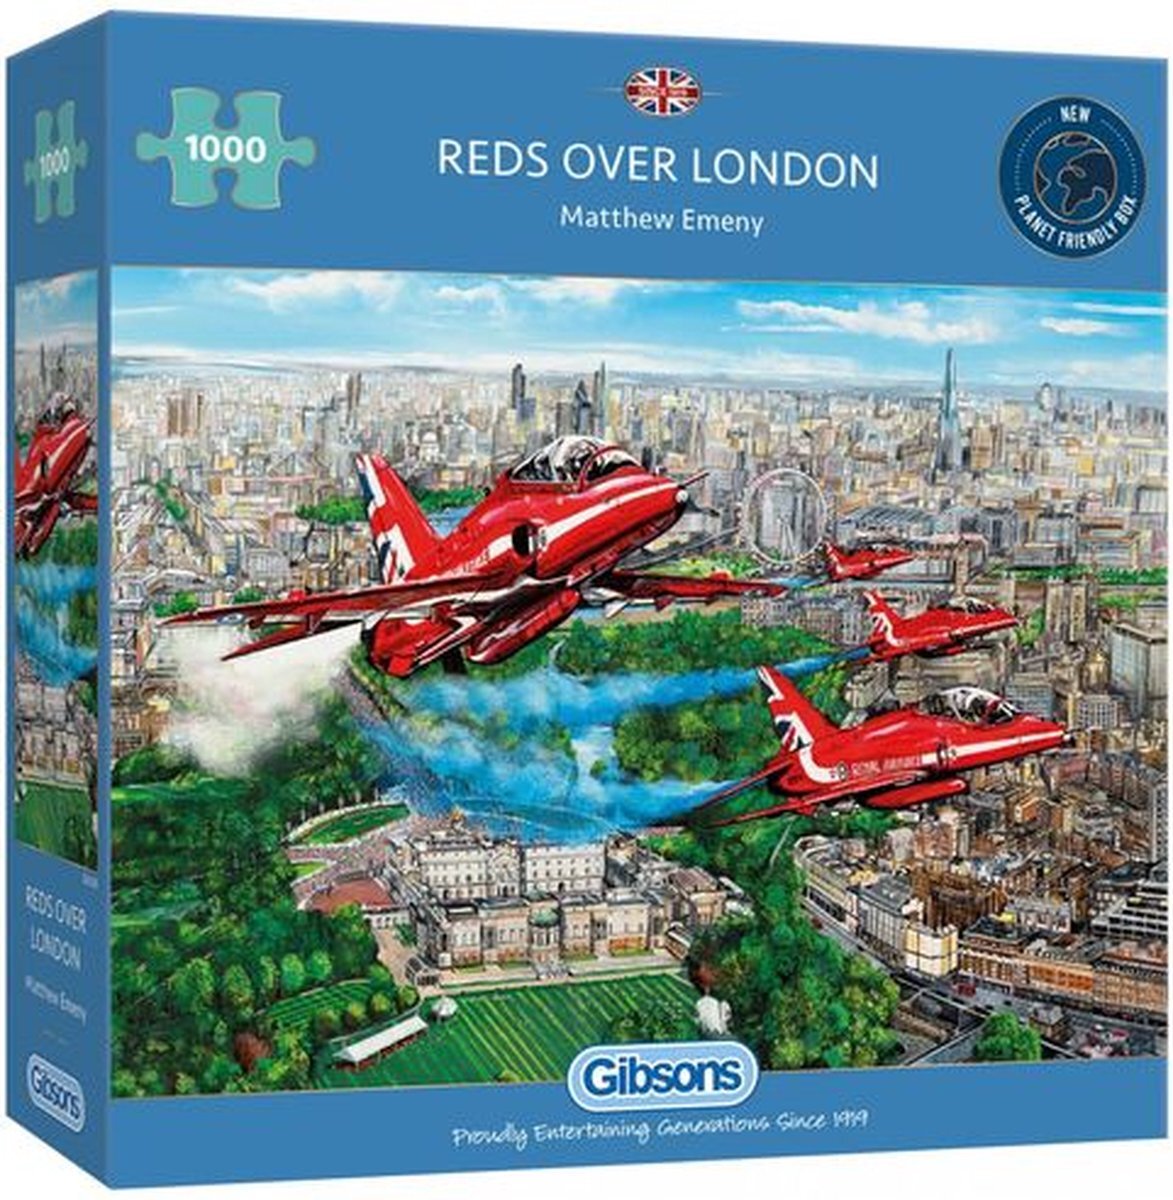 Gibsons Puzzles Puzzel gibsons reds over london 1000 stukjes